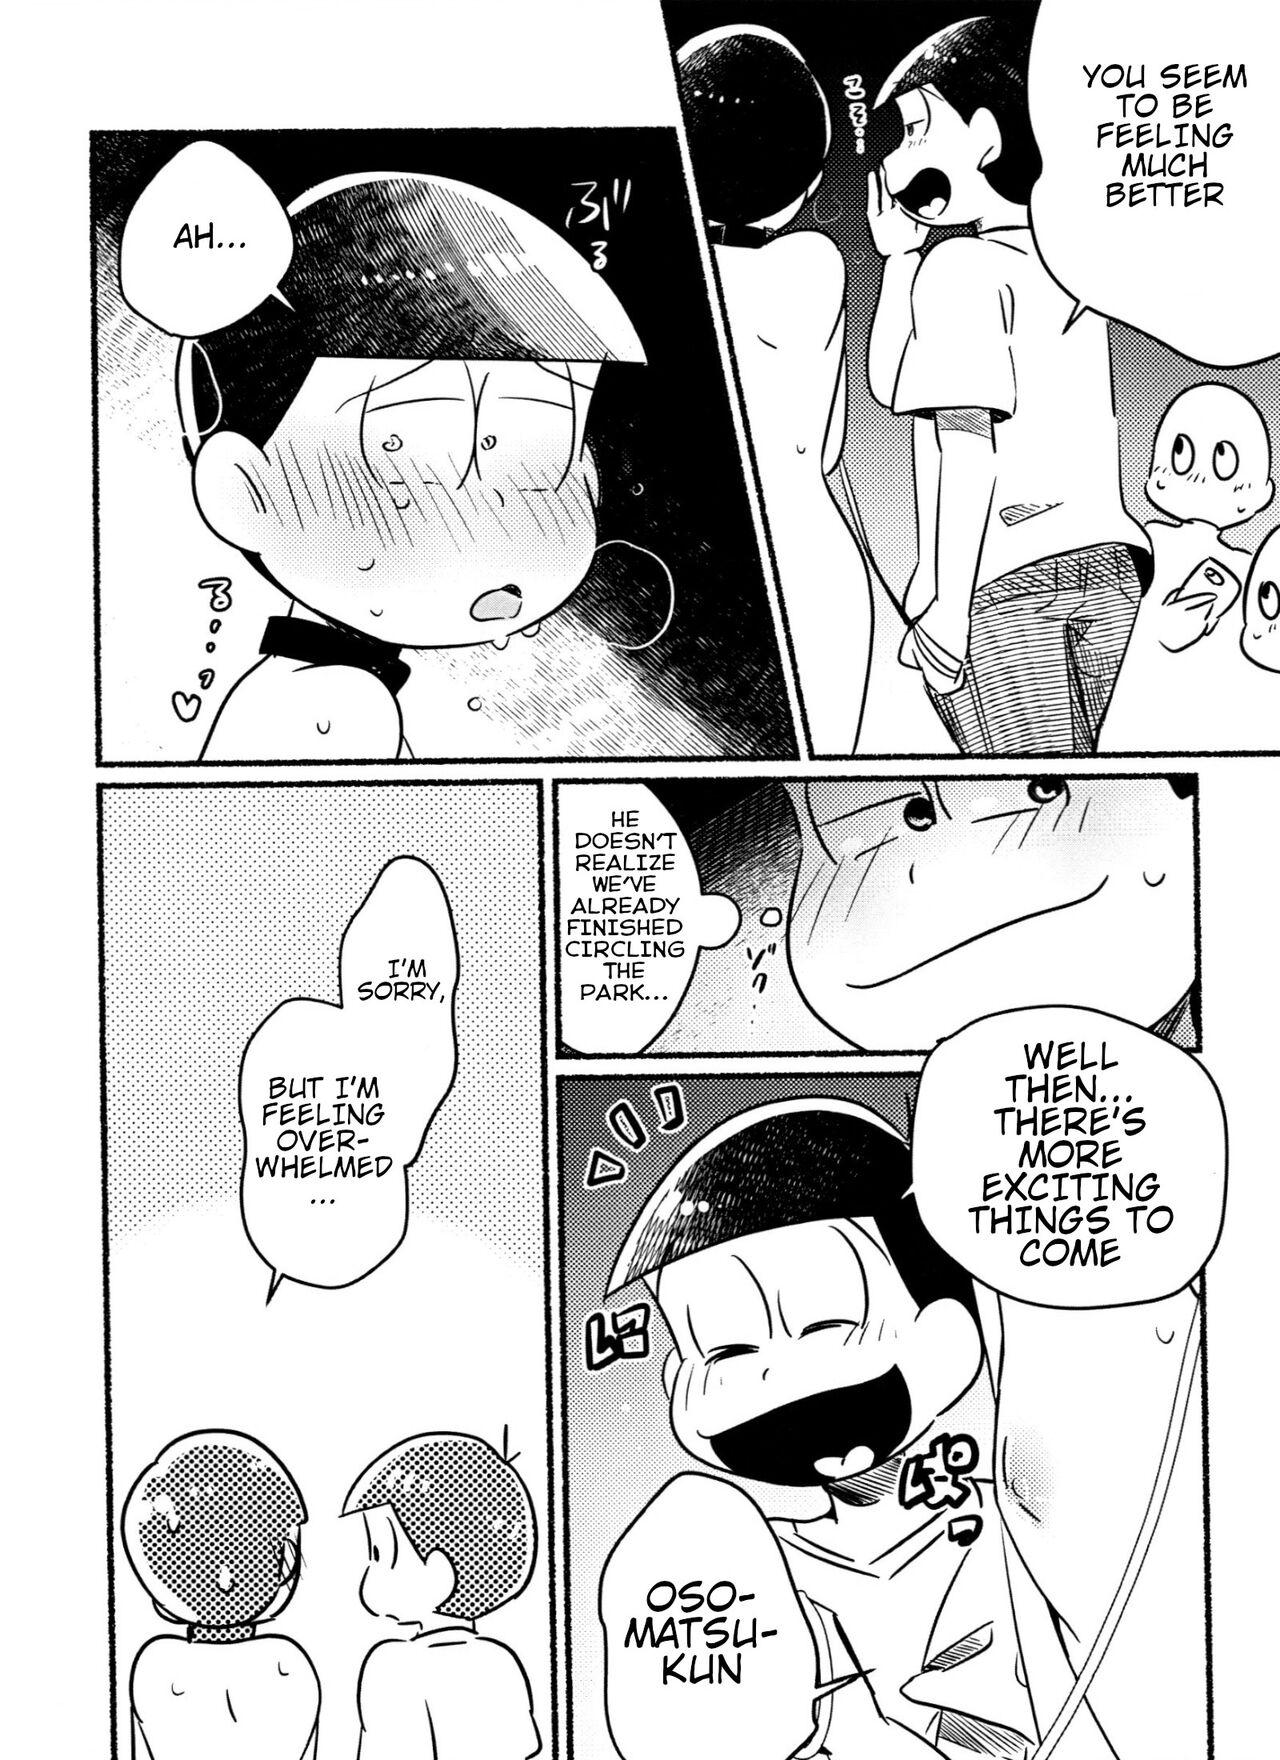 Inspector Choromatsu walks naked at night and does XXX in the public eye R18 book 10